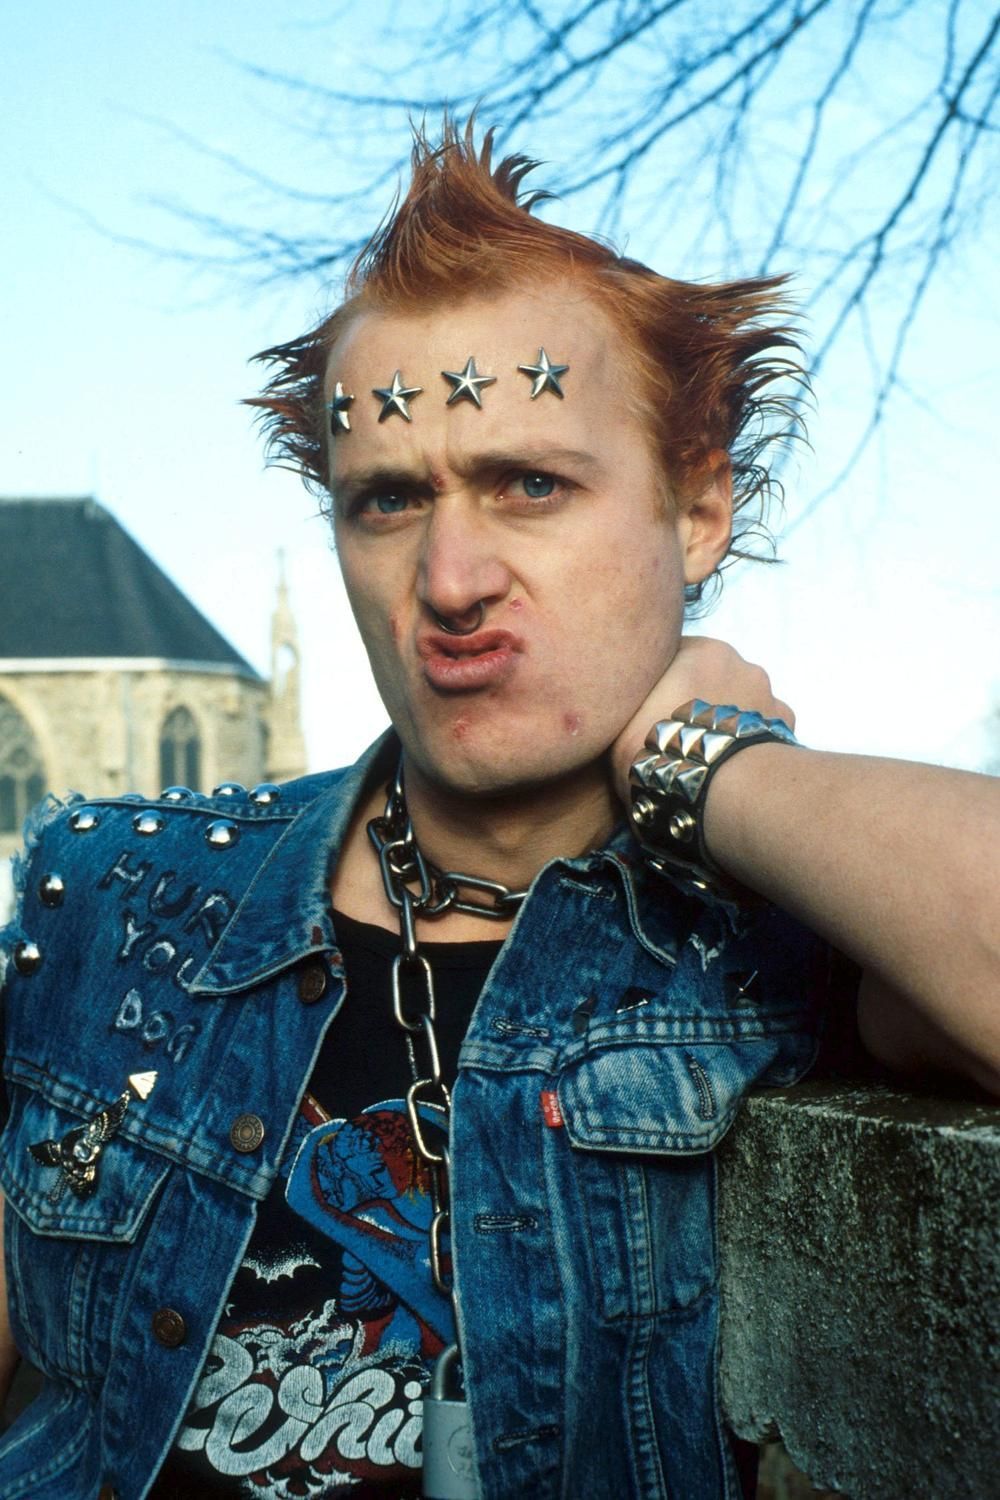 Vyvyan Young Ones